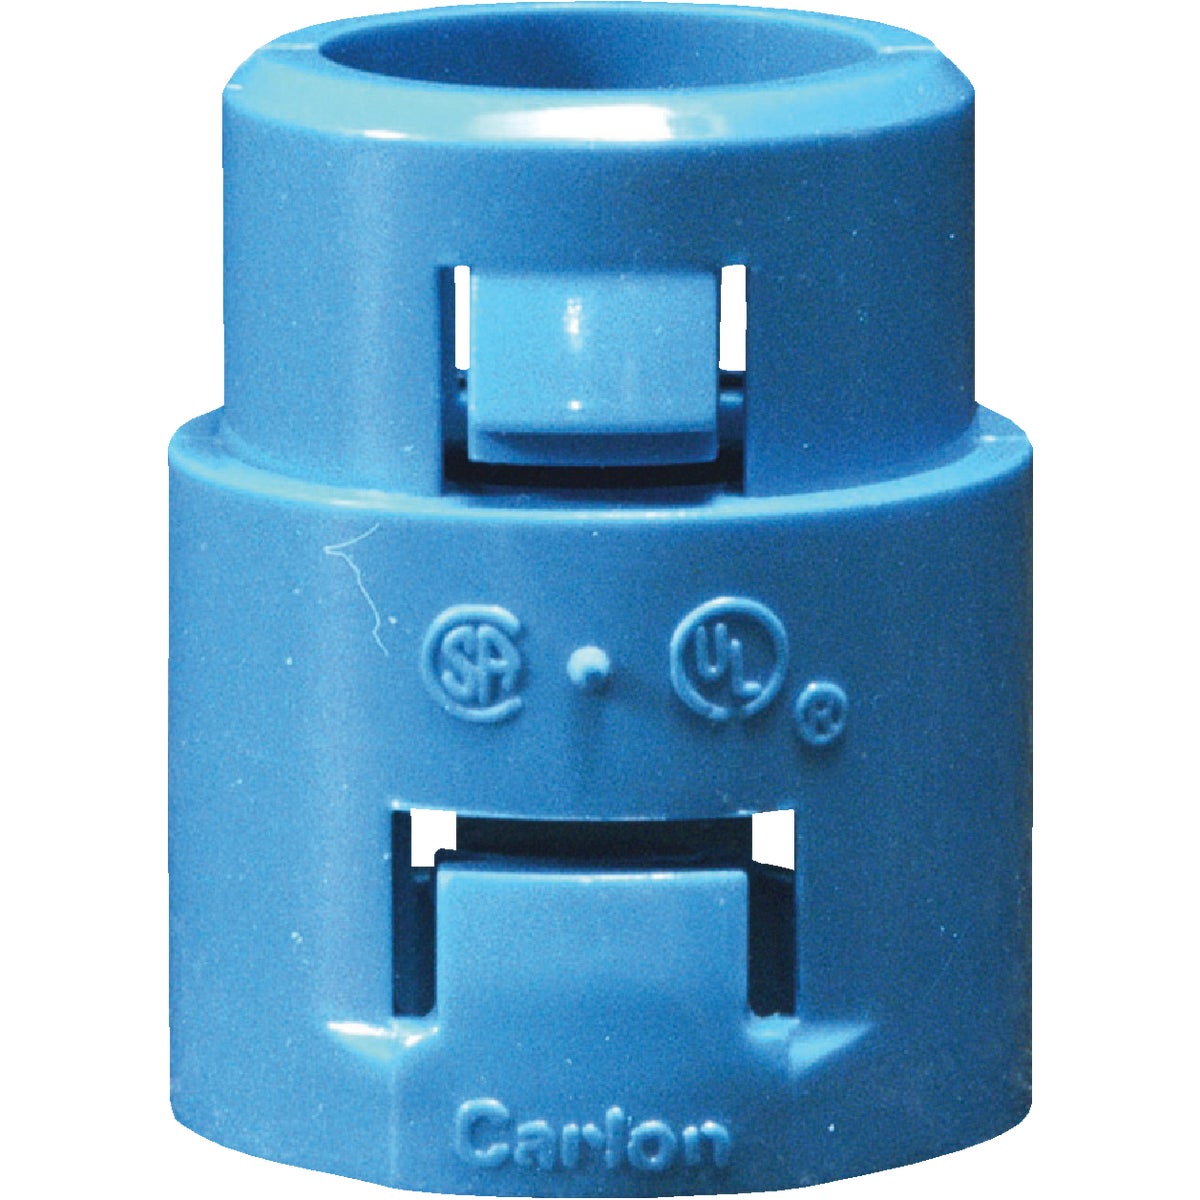 Carlon 3/4 In. ENT End Adapter